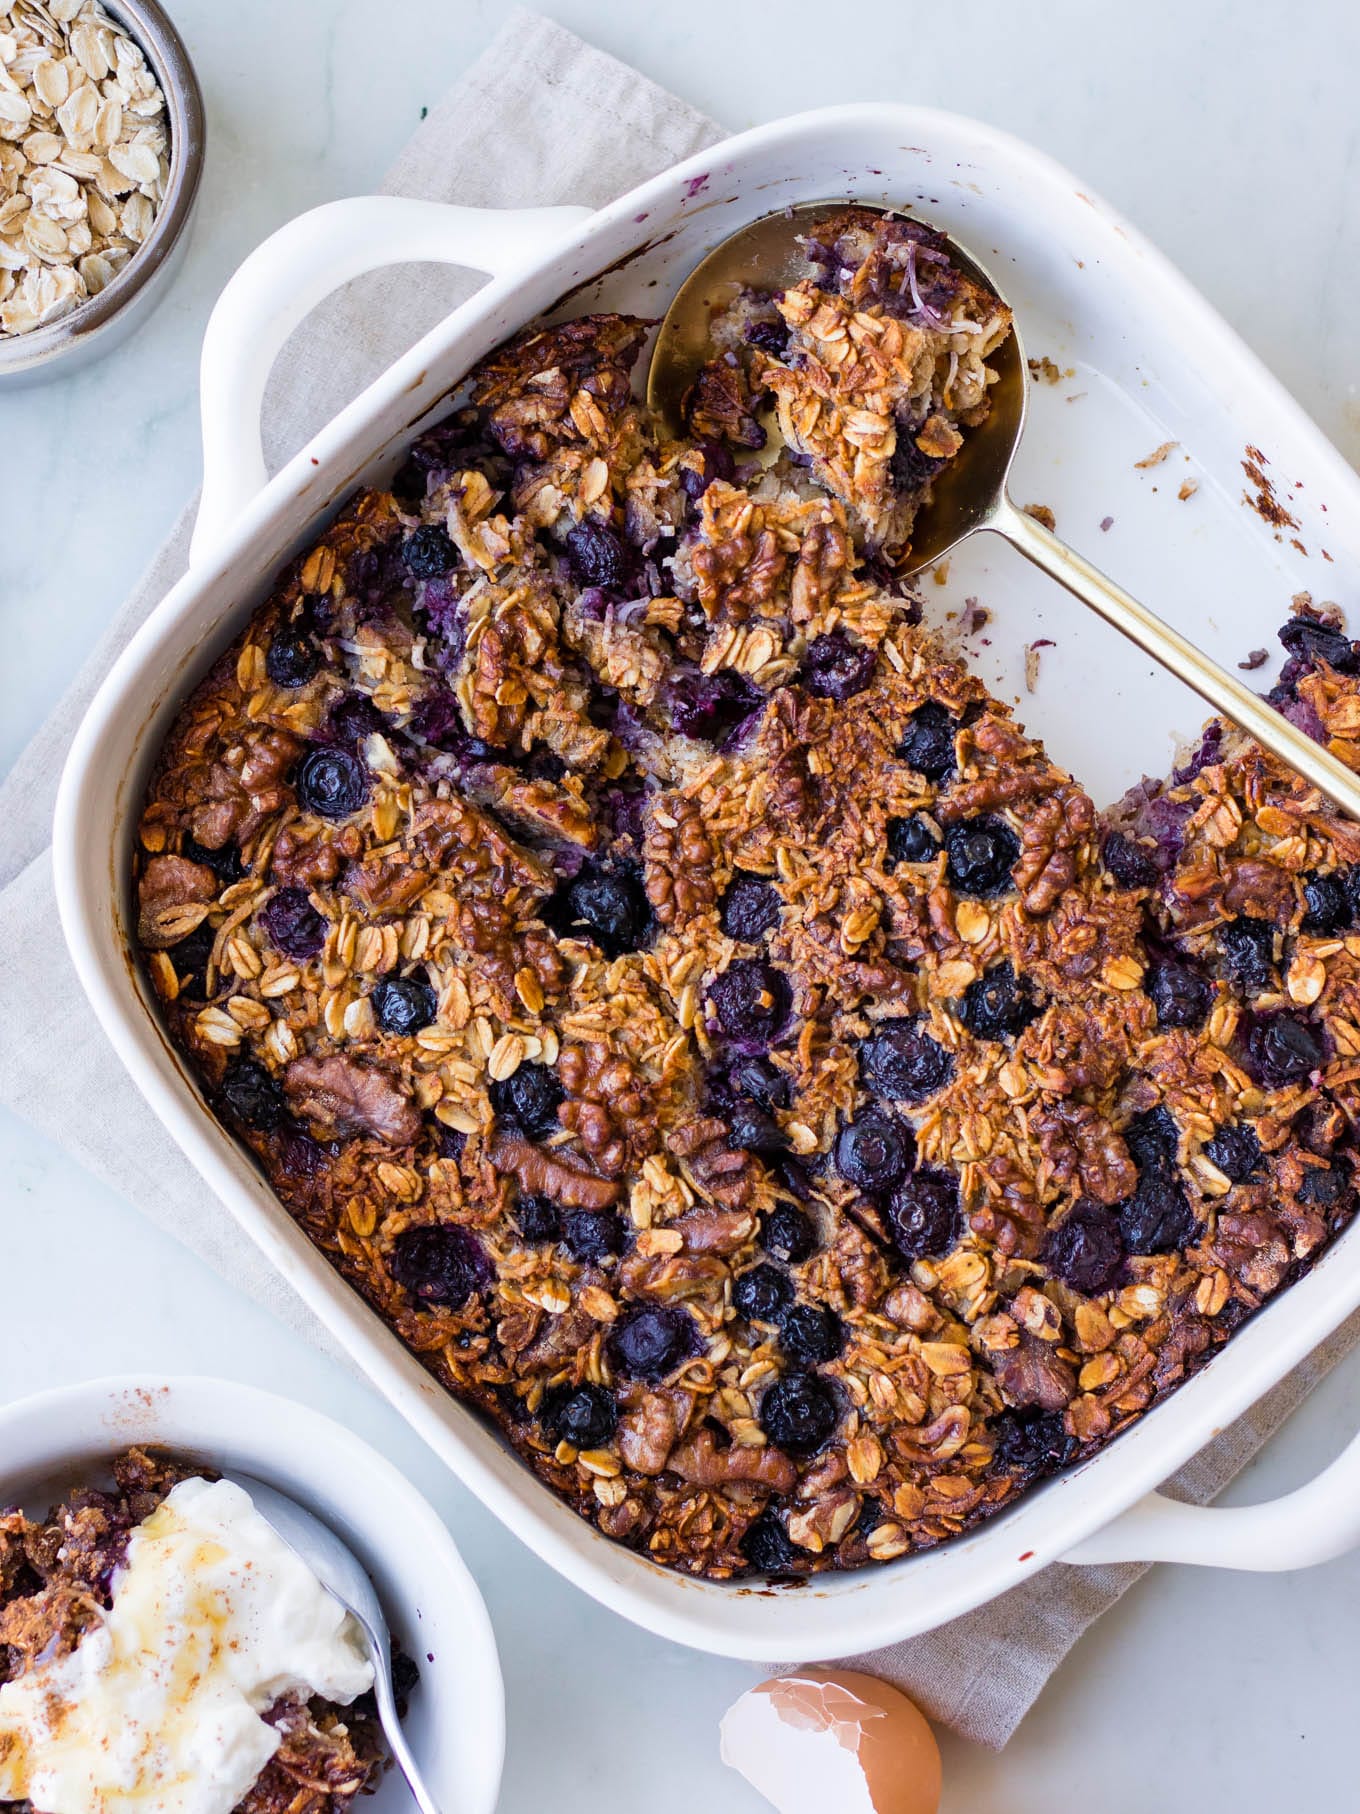 Coconut Blueberry Baked Oats - Nourish Every Day